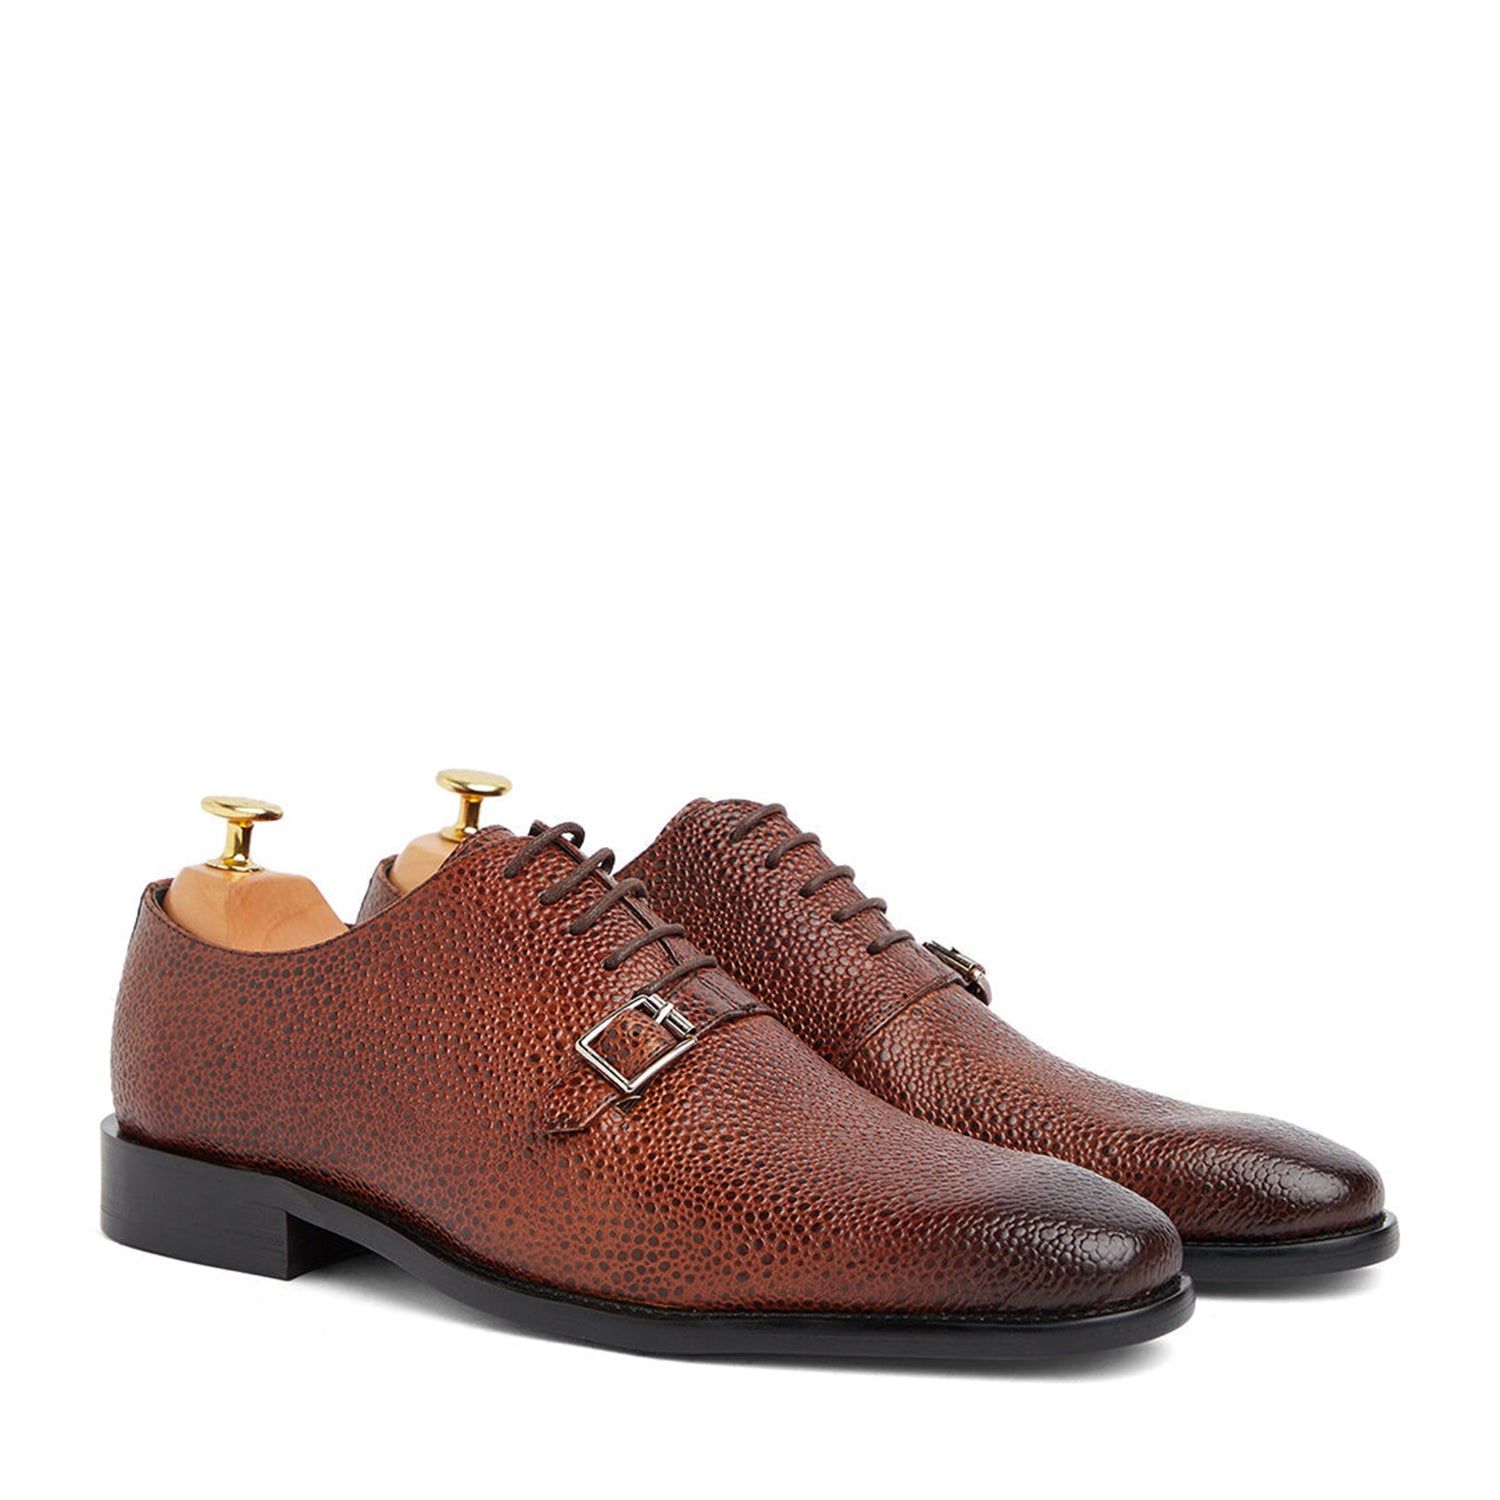 Stingray Leather Oxford Wine Shoes